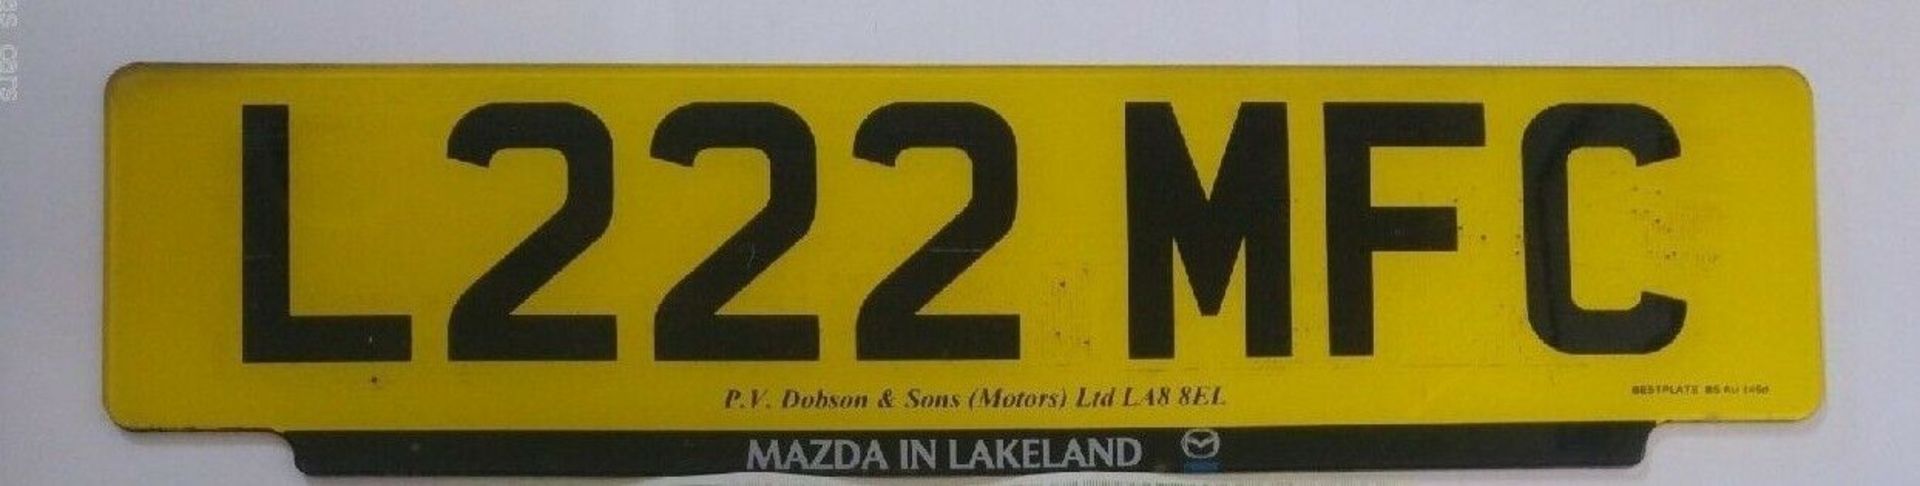 L222 MFC Cherished Private Personalised Number Plate on Retention Ideal Gift